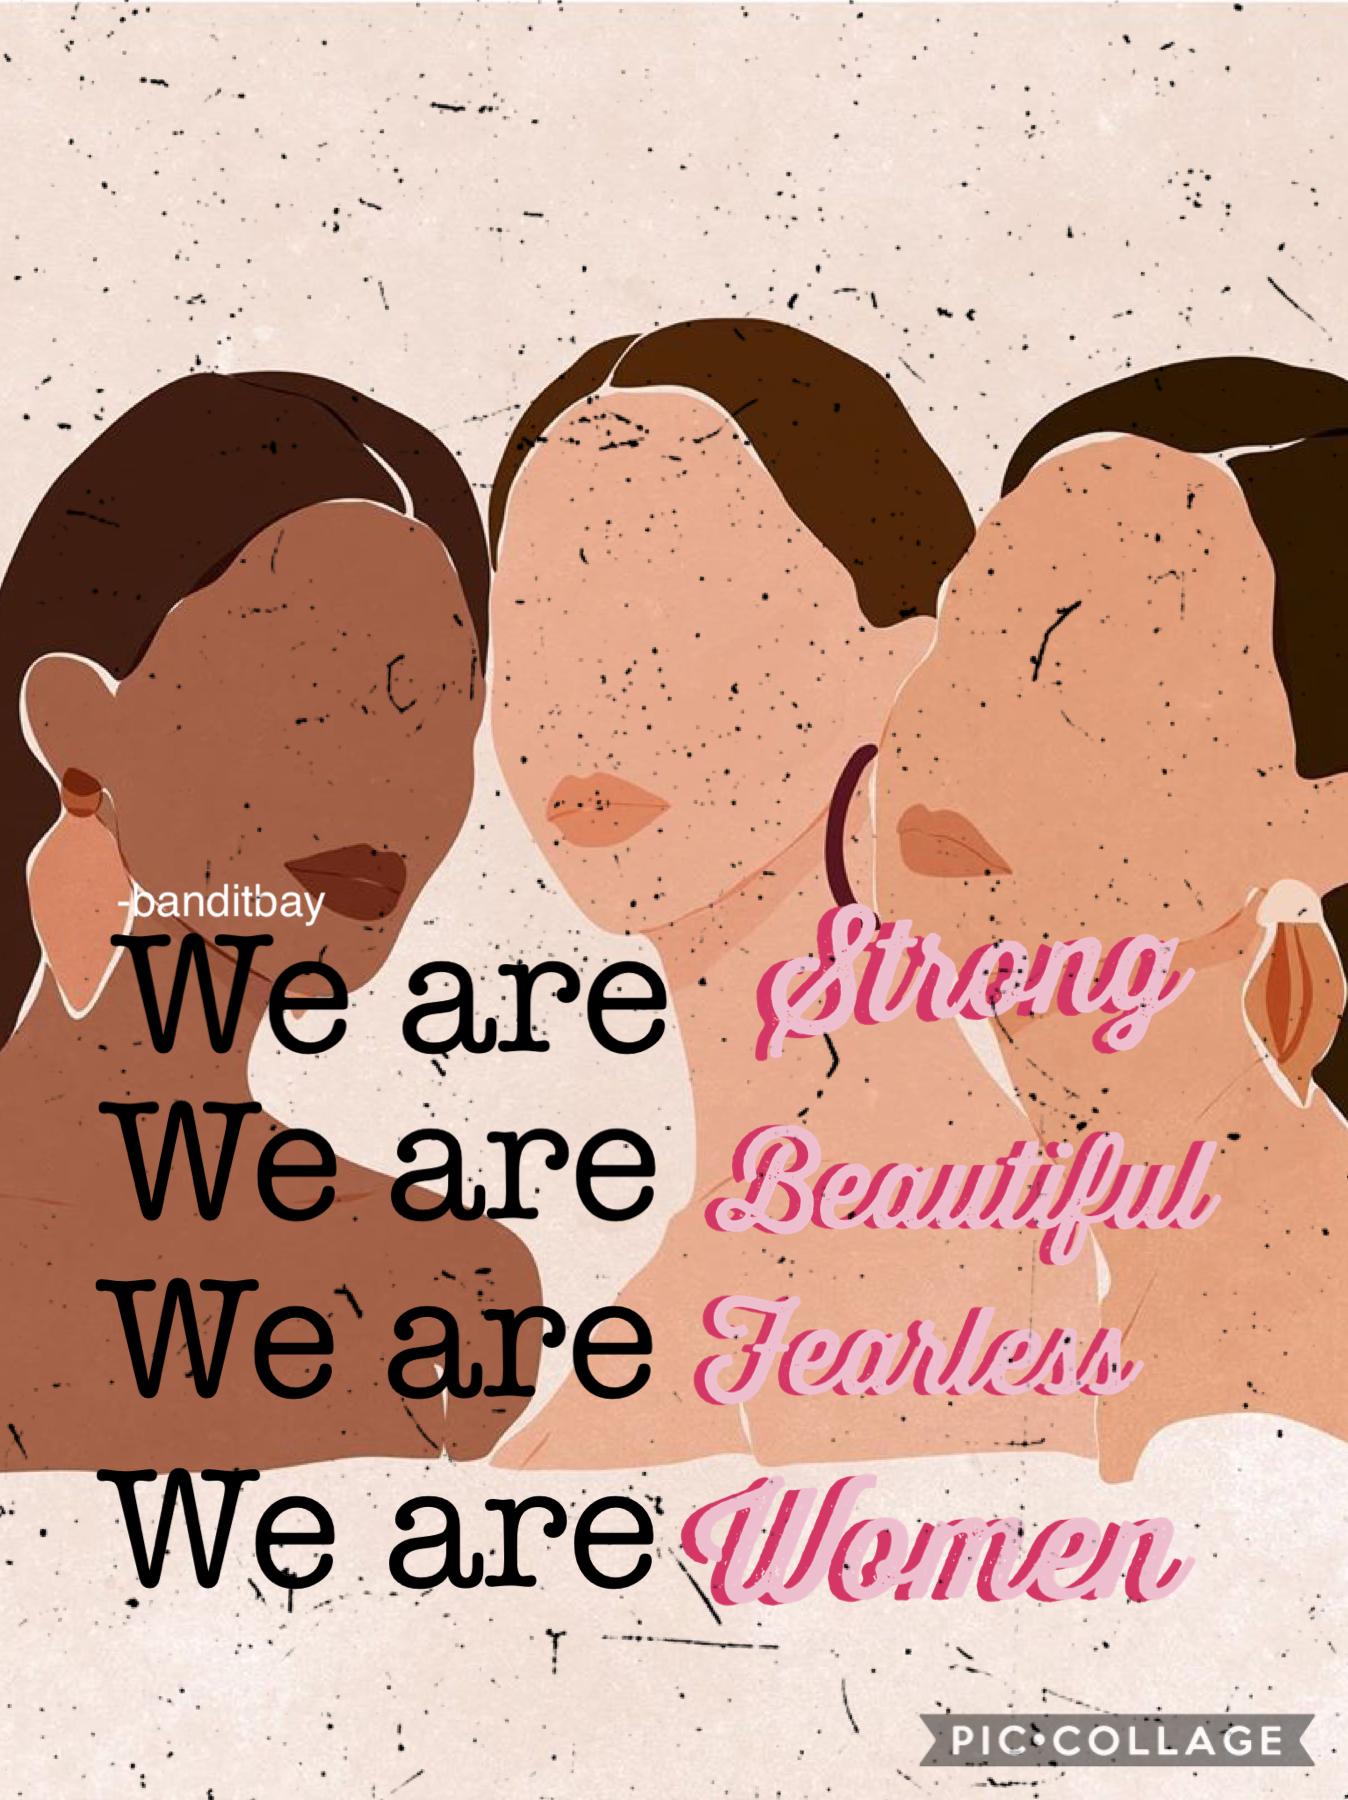 ✊🏼Tap✊🏼
💪🏼We are stong💪🏼
🥰We are beautiful🥰
✨We are Woman✨
🦋Woman Matter Collection🦋
🦋10/23/2020🦋